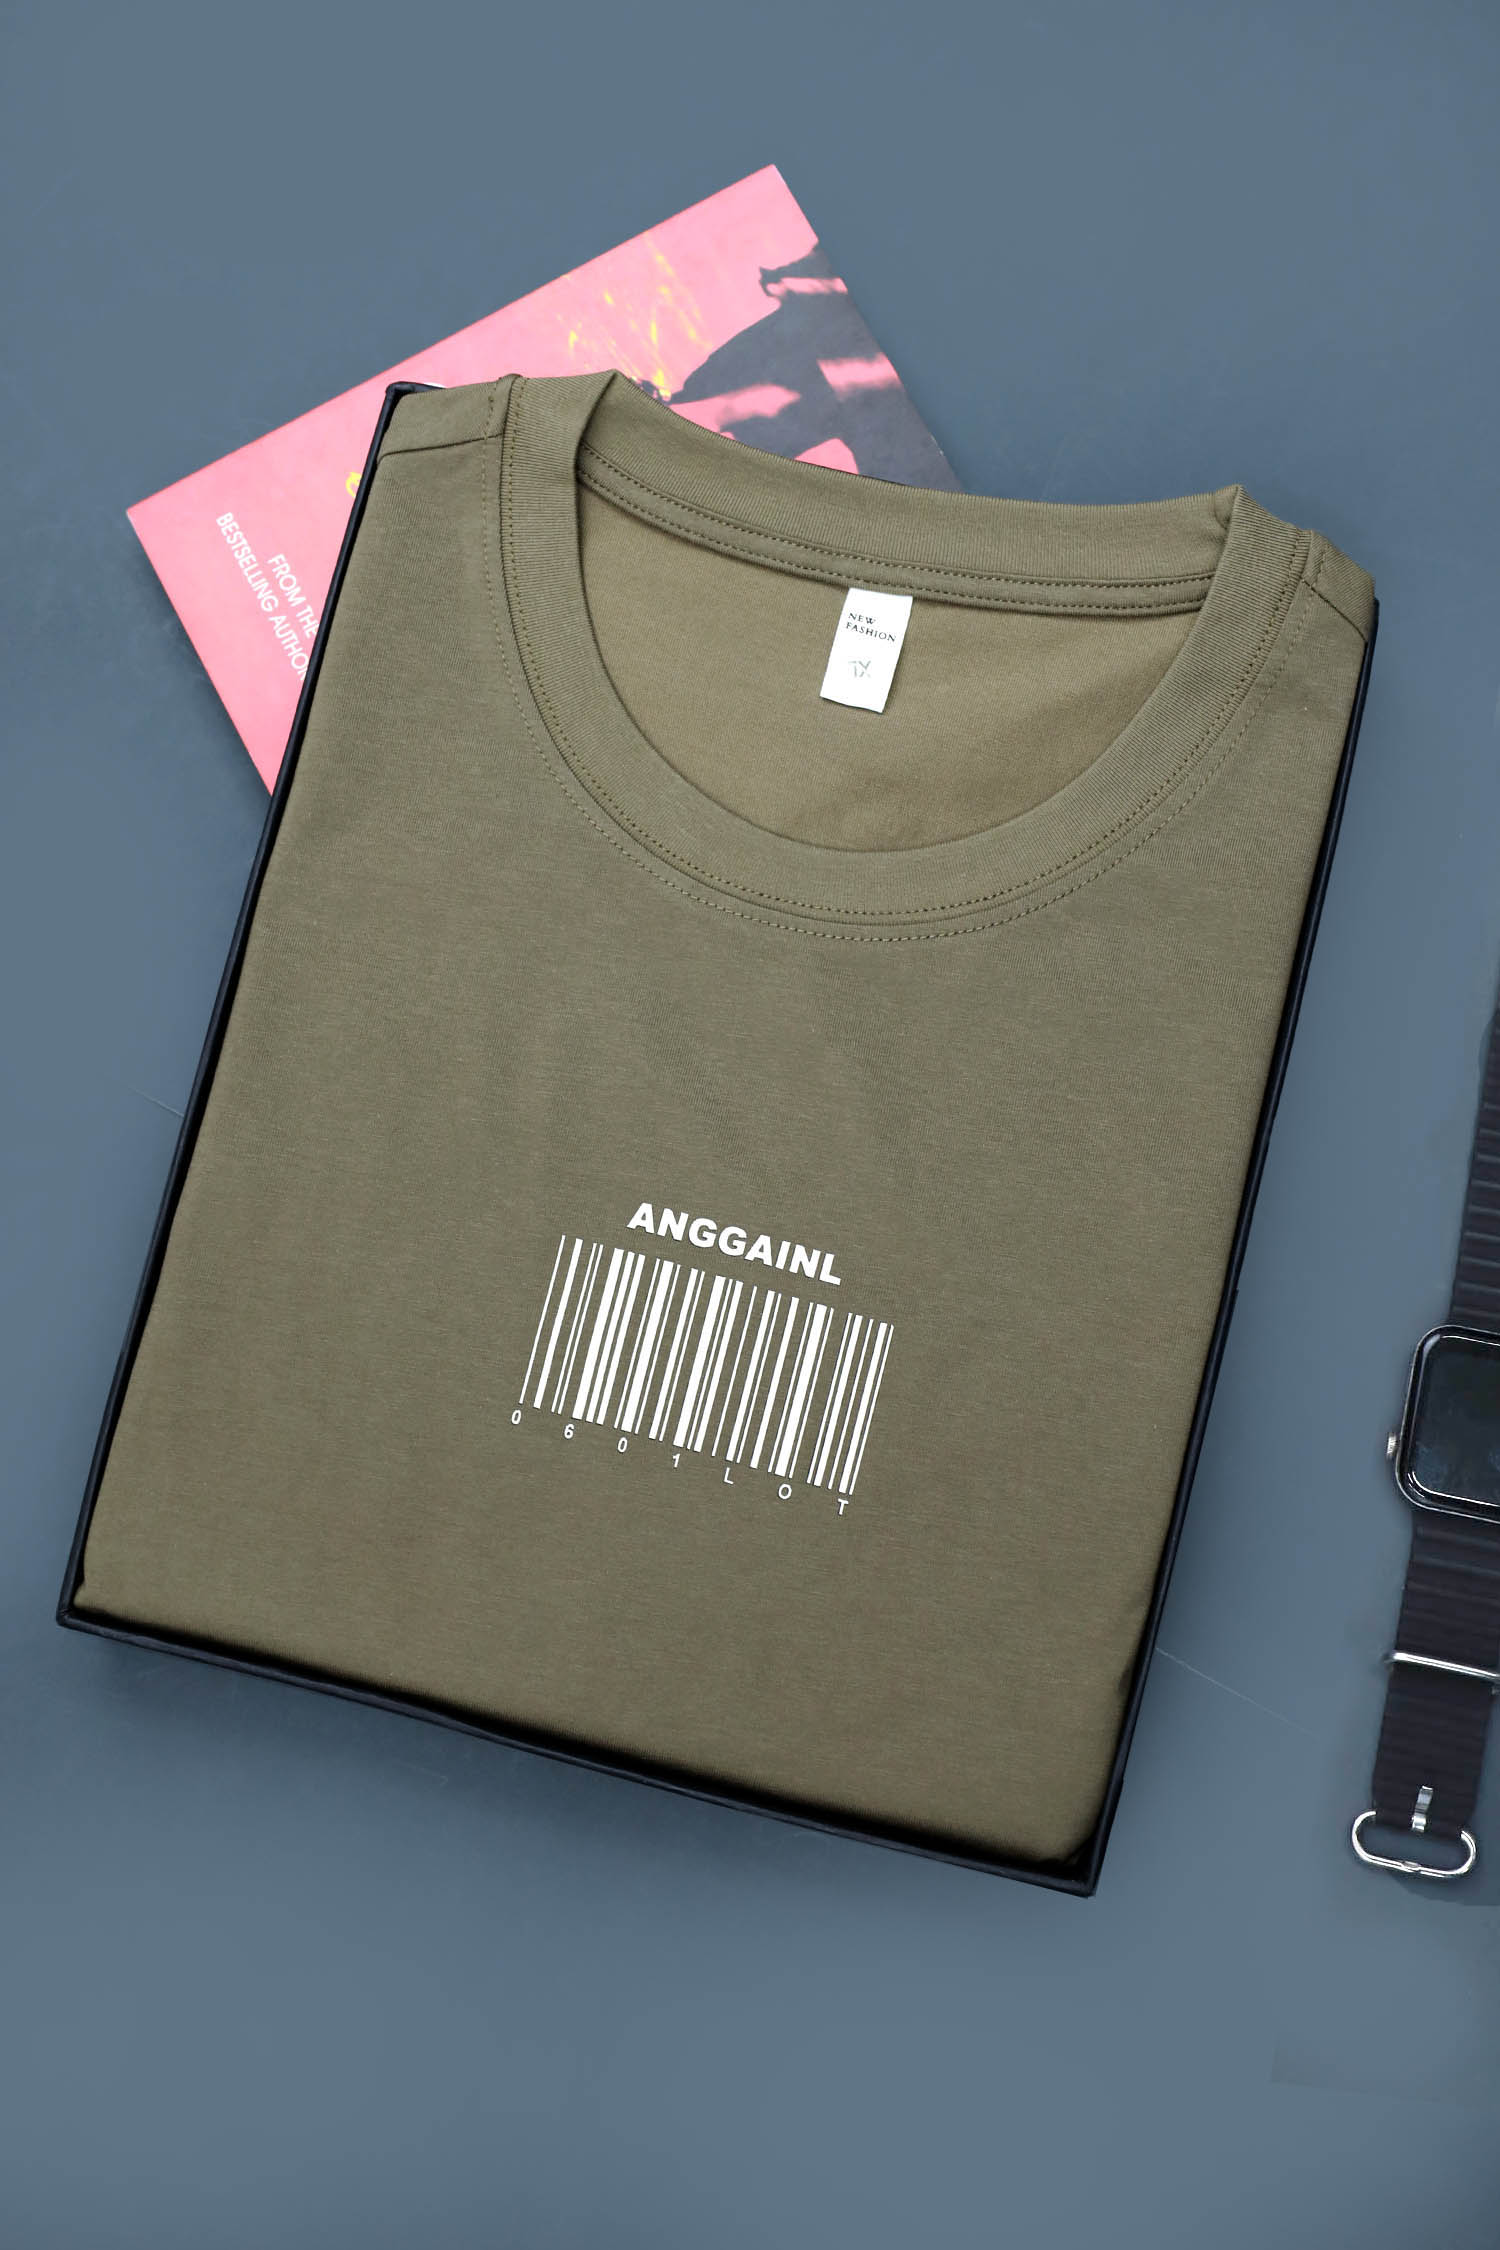 Crew Neck With Barcode Style T-Shirt